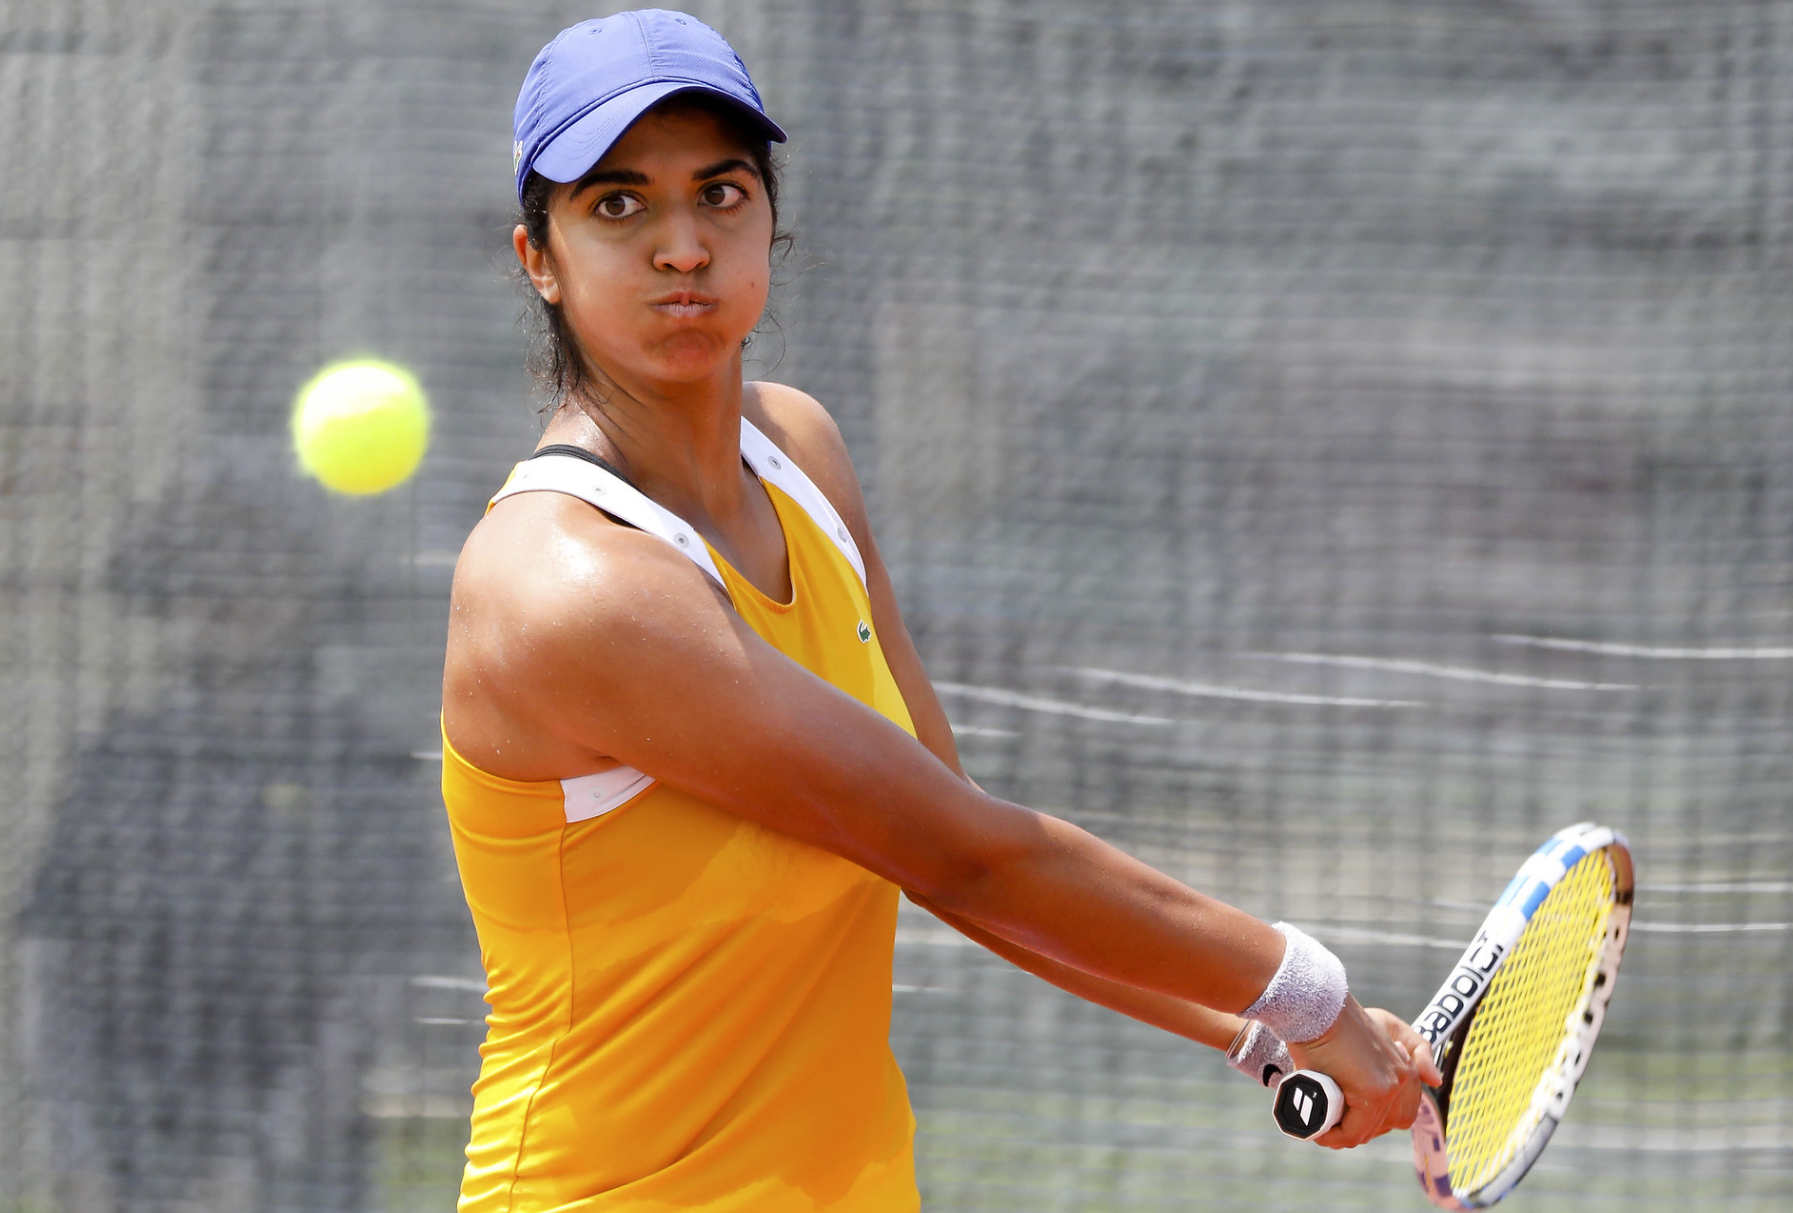 Indian-American Nikita Uberoi, an Ivy league graduate and now steadily making a name for herself on the Pro tour.